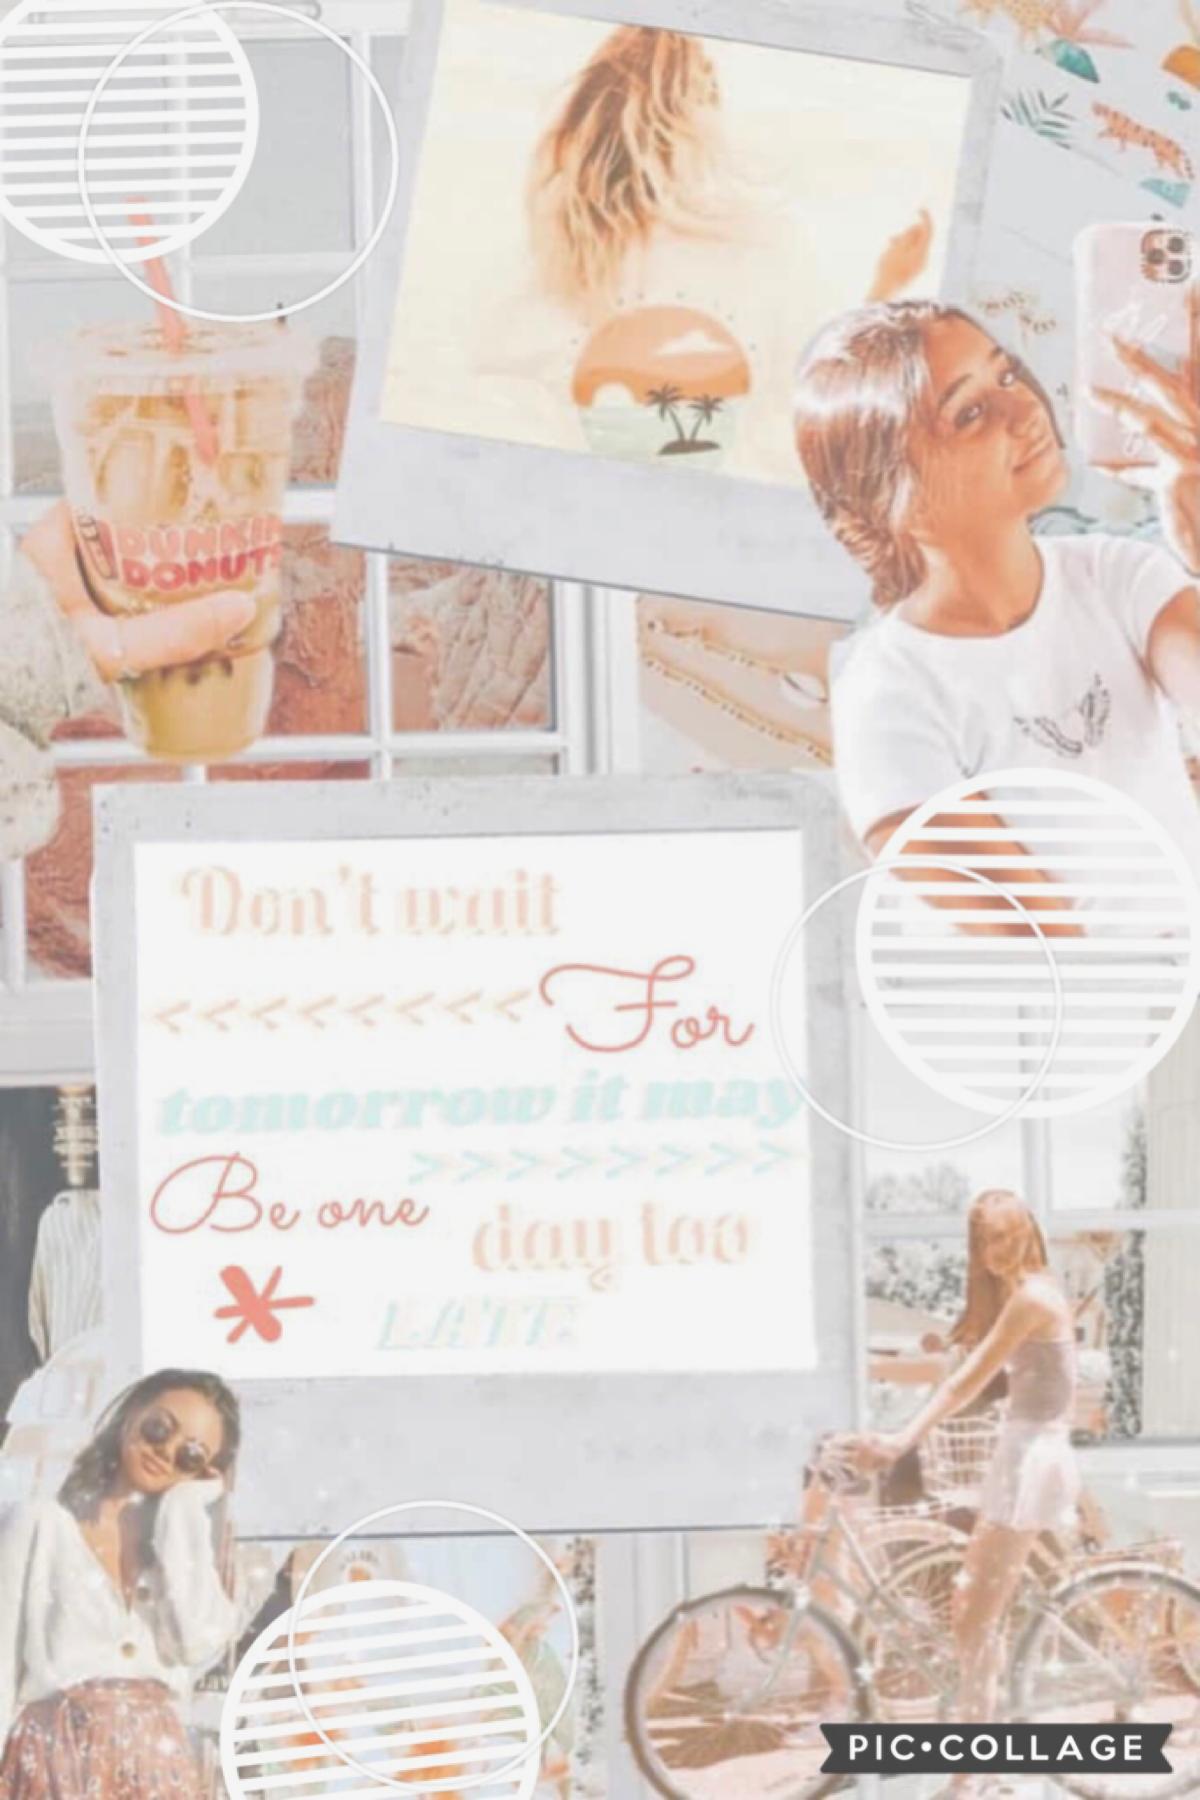 ☀️Tap☀️
Hey everyone shoutout to -pretty_little_things- for doing this collab with me she did the stunning bg and I did the text I hope we can collab again soon this was so much fun!